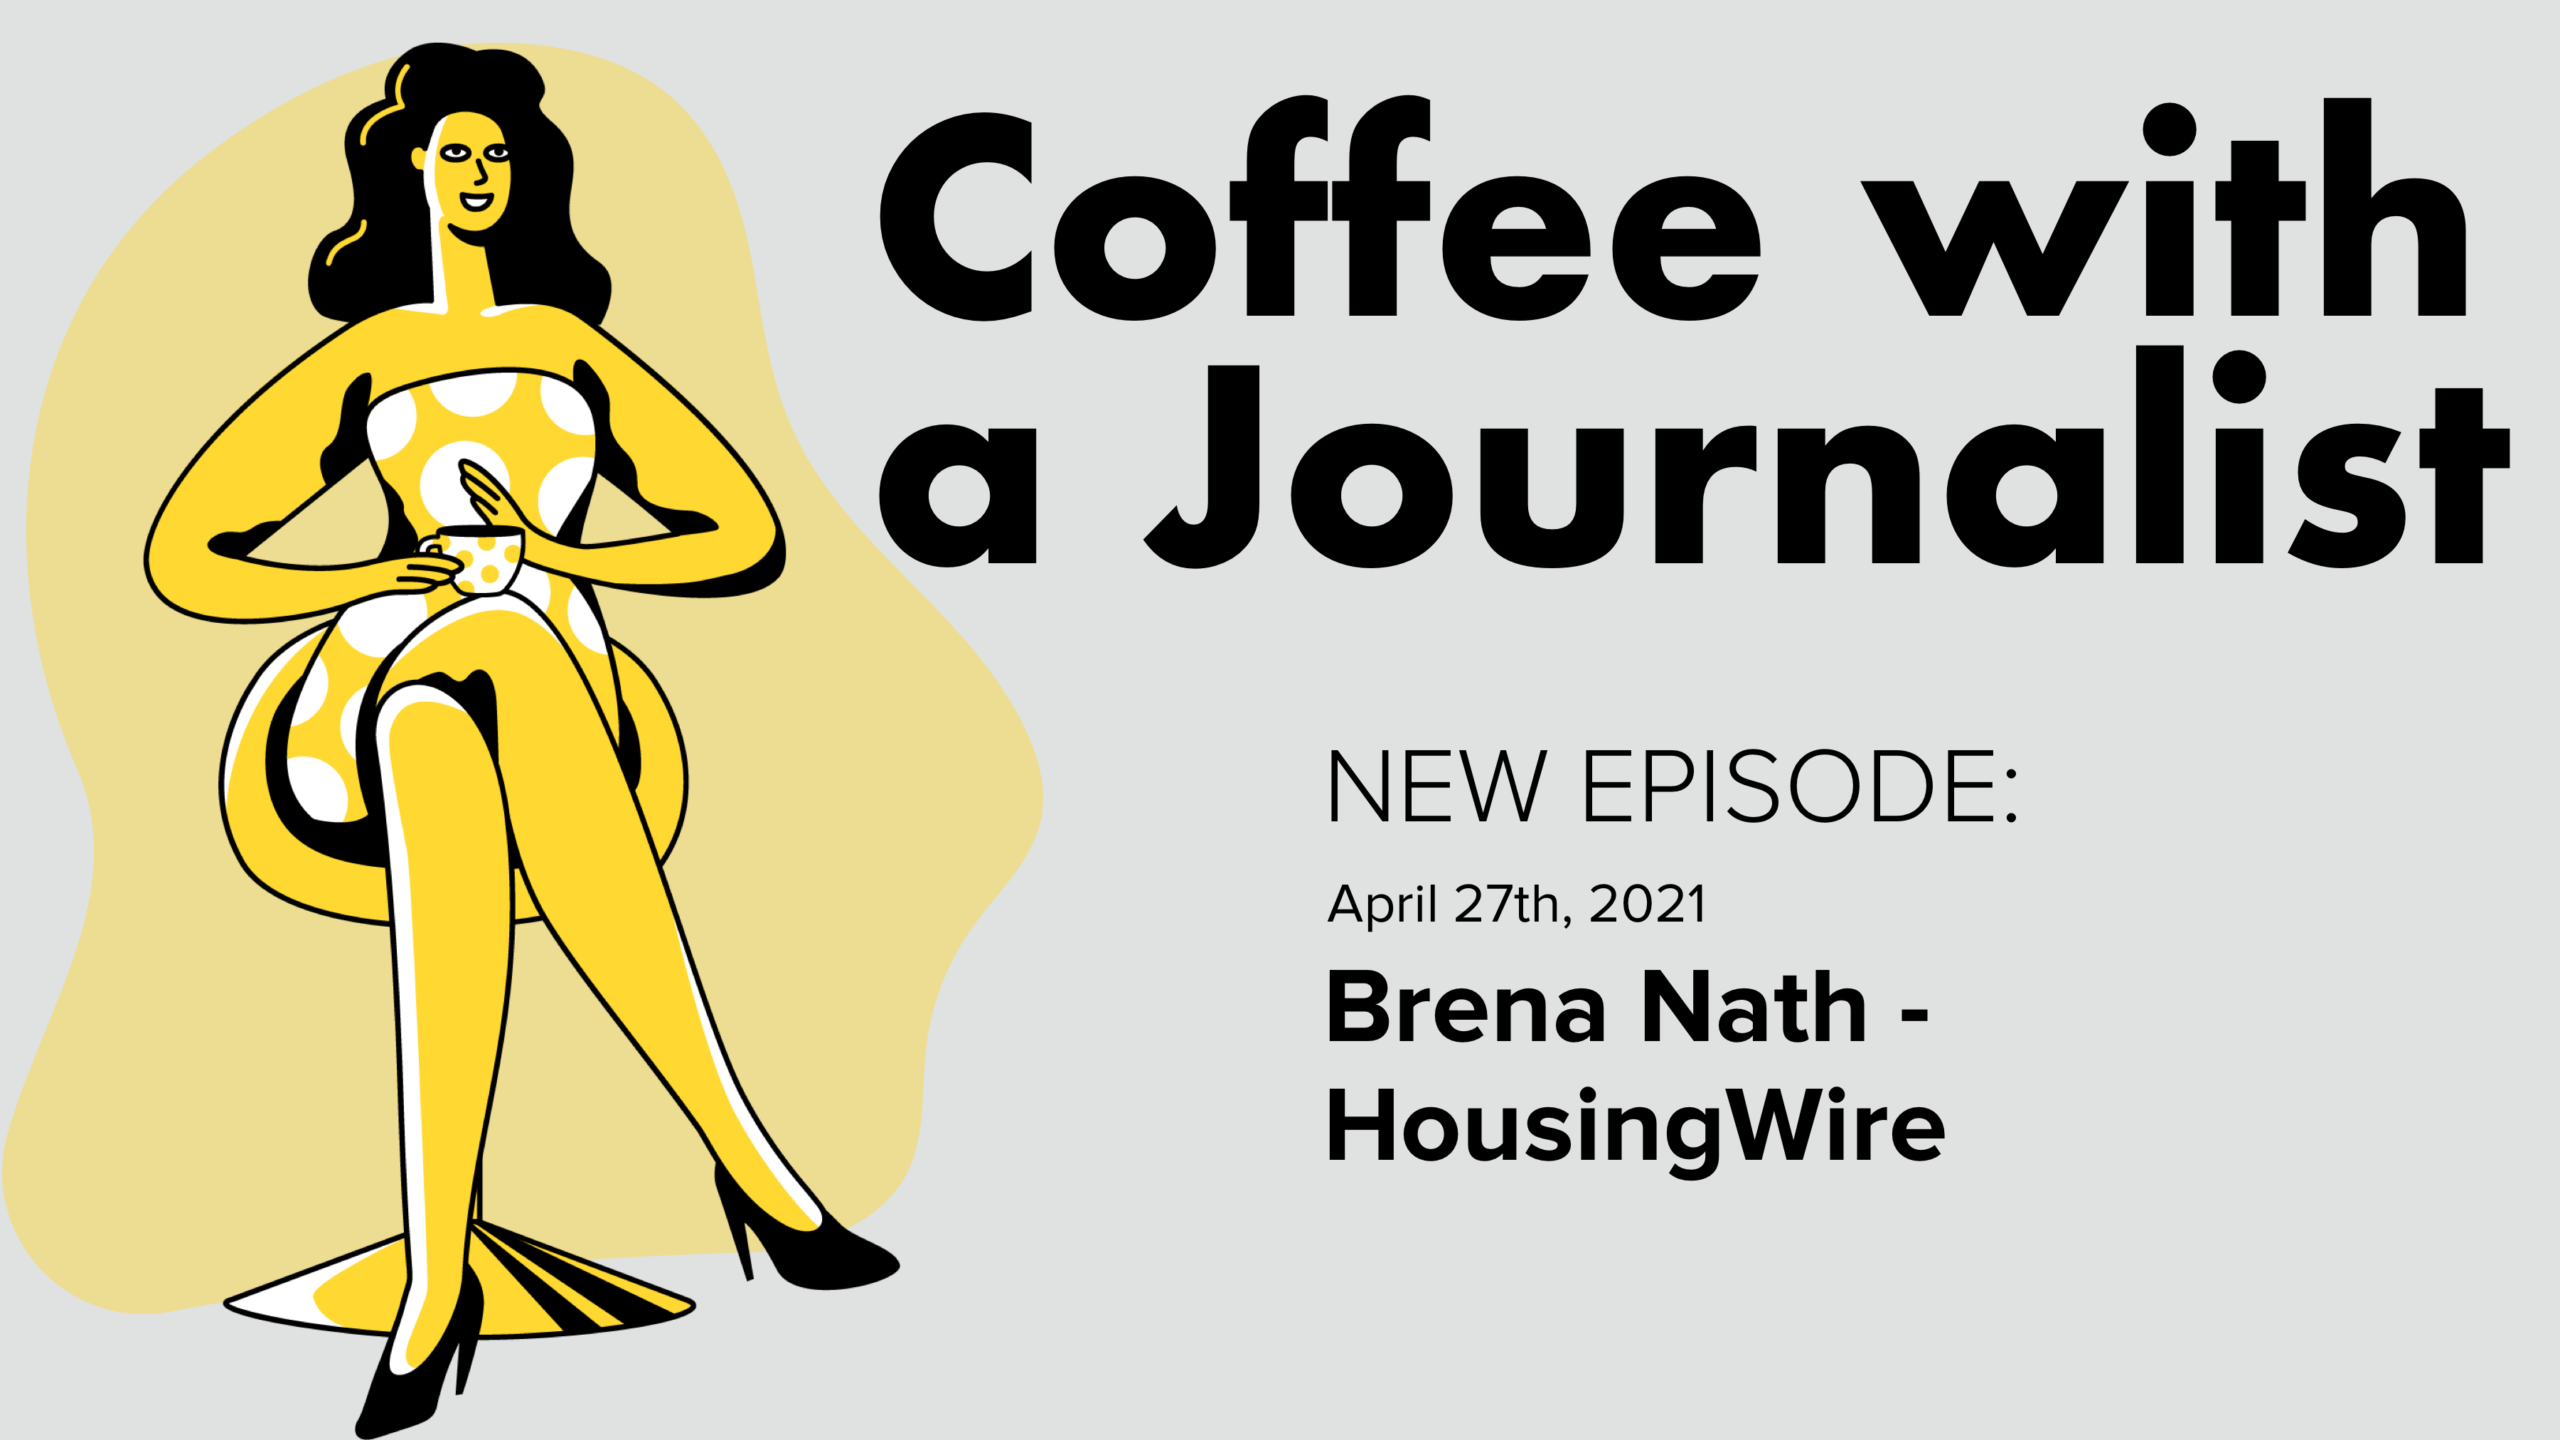 Coffee with a Journalist: Brena Nath, HousingWire